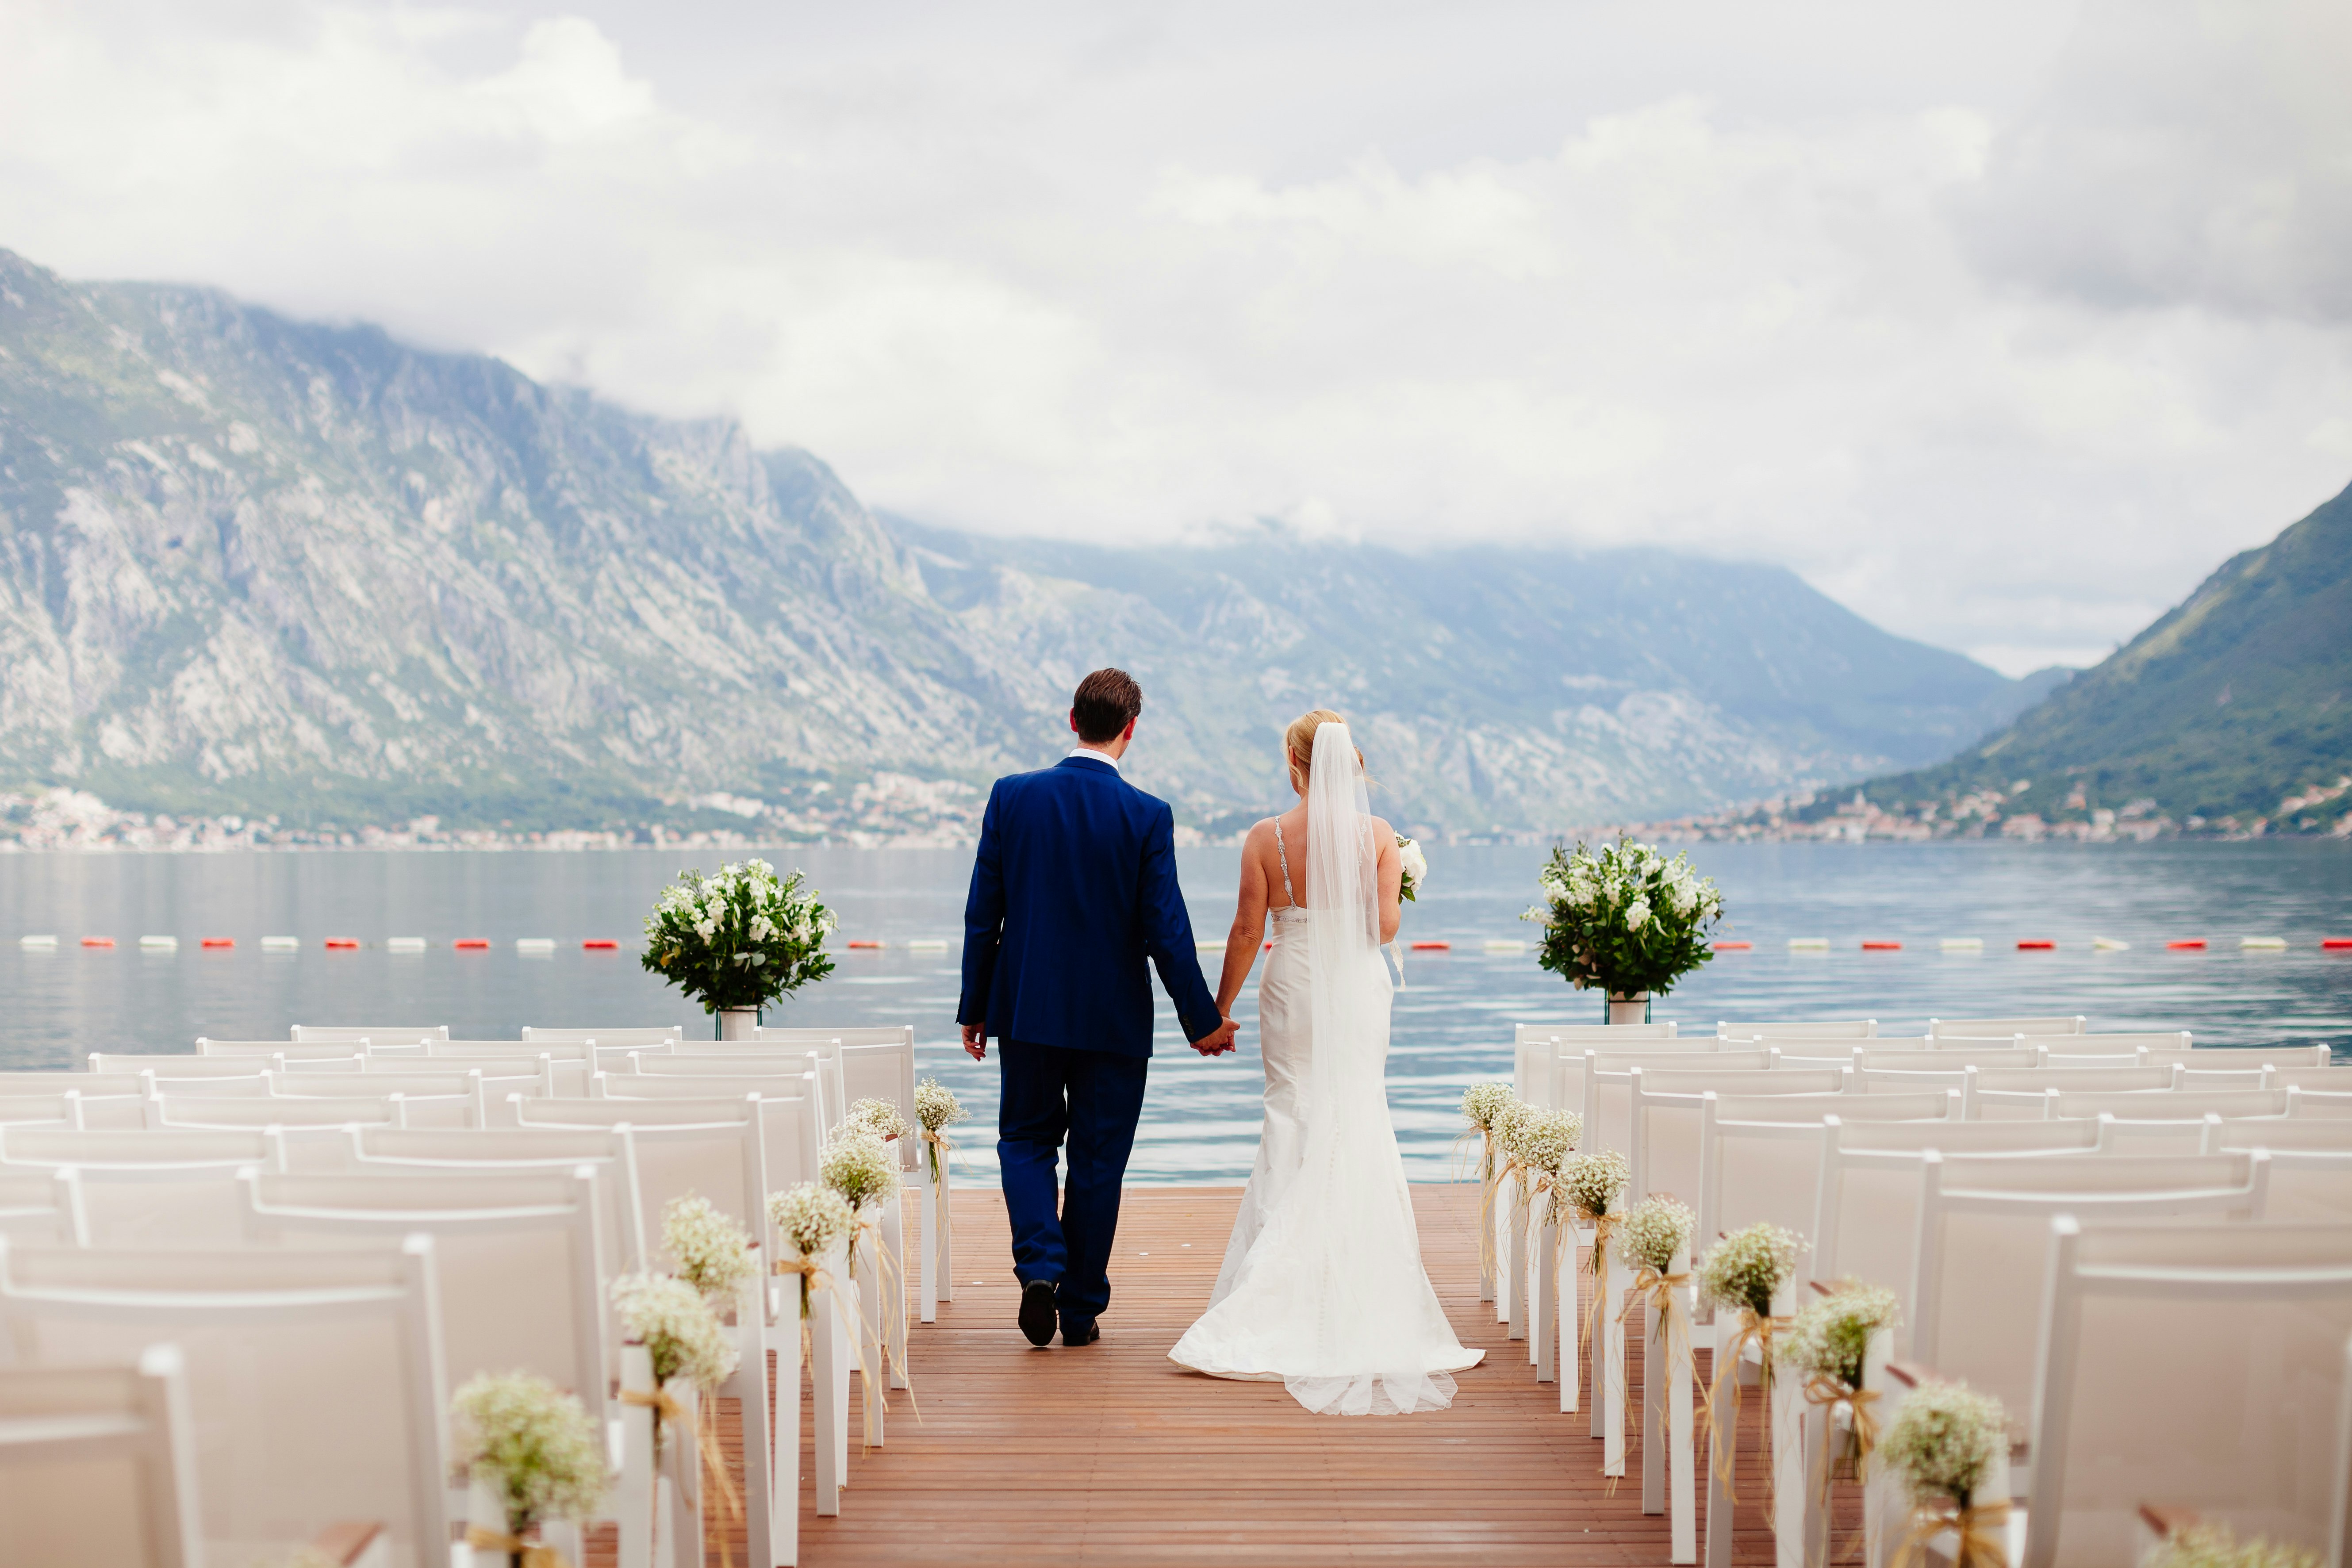 A bride and groom walk between sets of empty chairs laid out for a wedding ceremony in a mountainous lakeside setting.